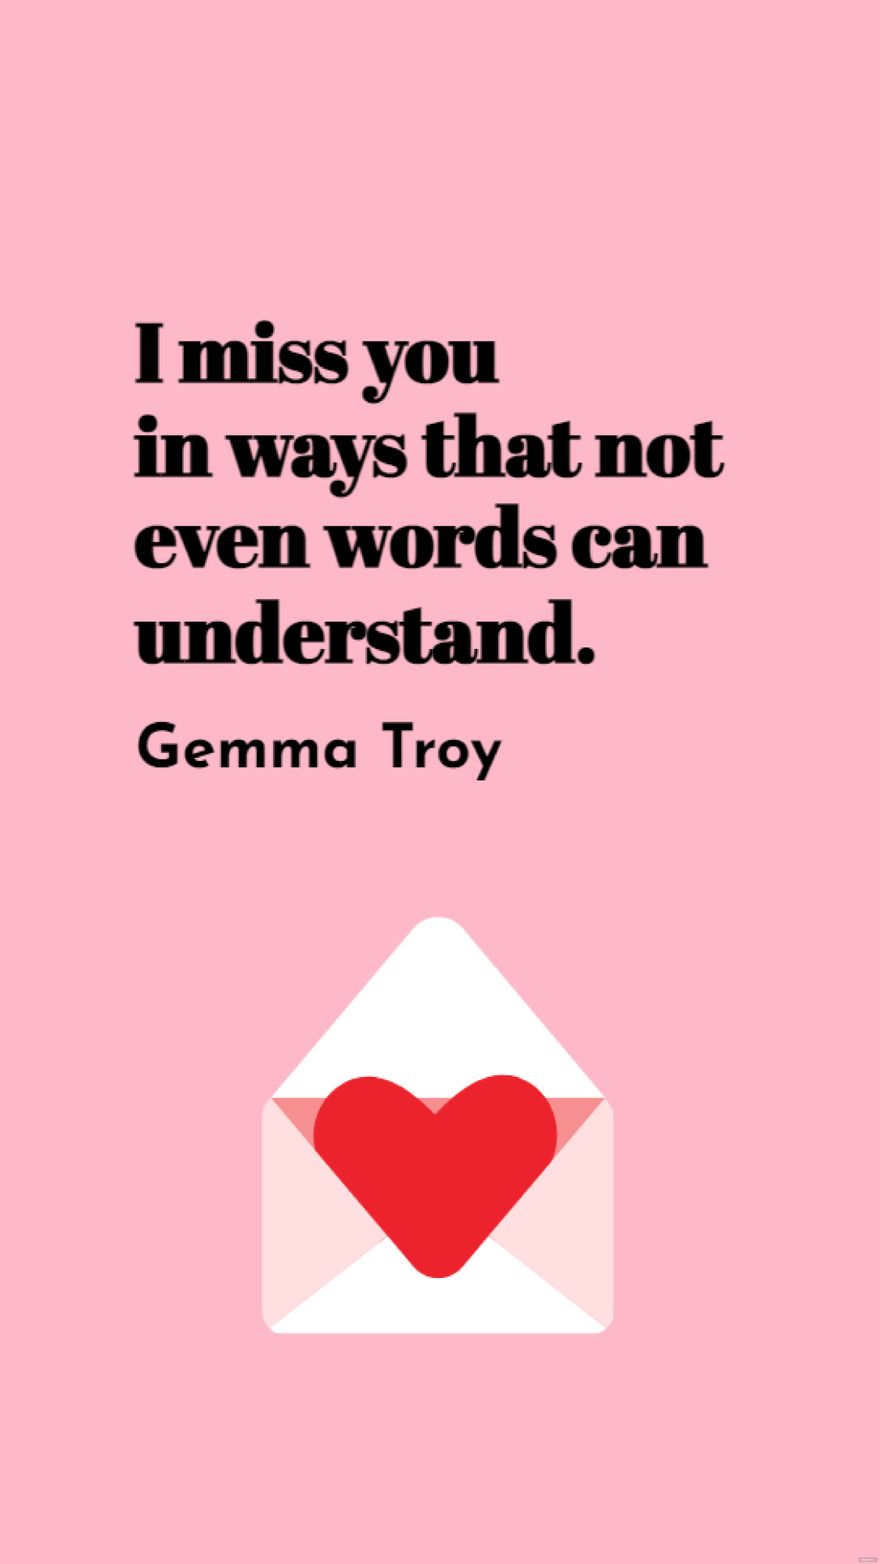 Free Gemma Troy - I miss you in ways that not even words can understand. in JPG